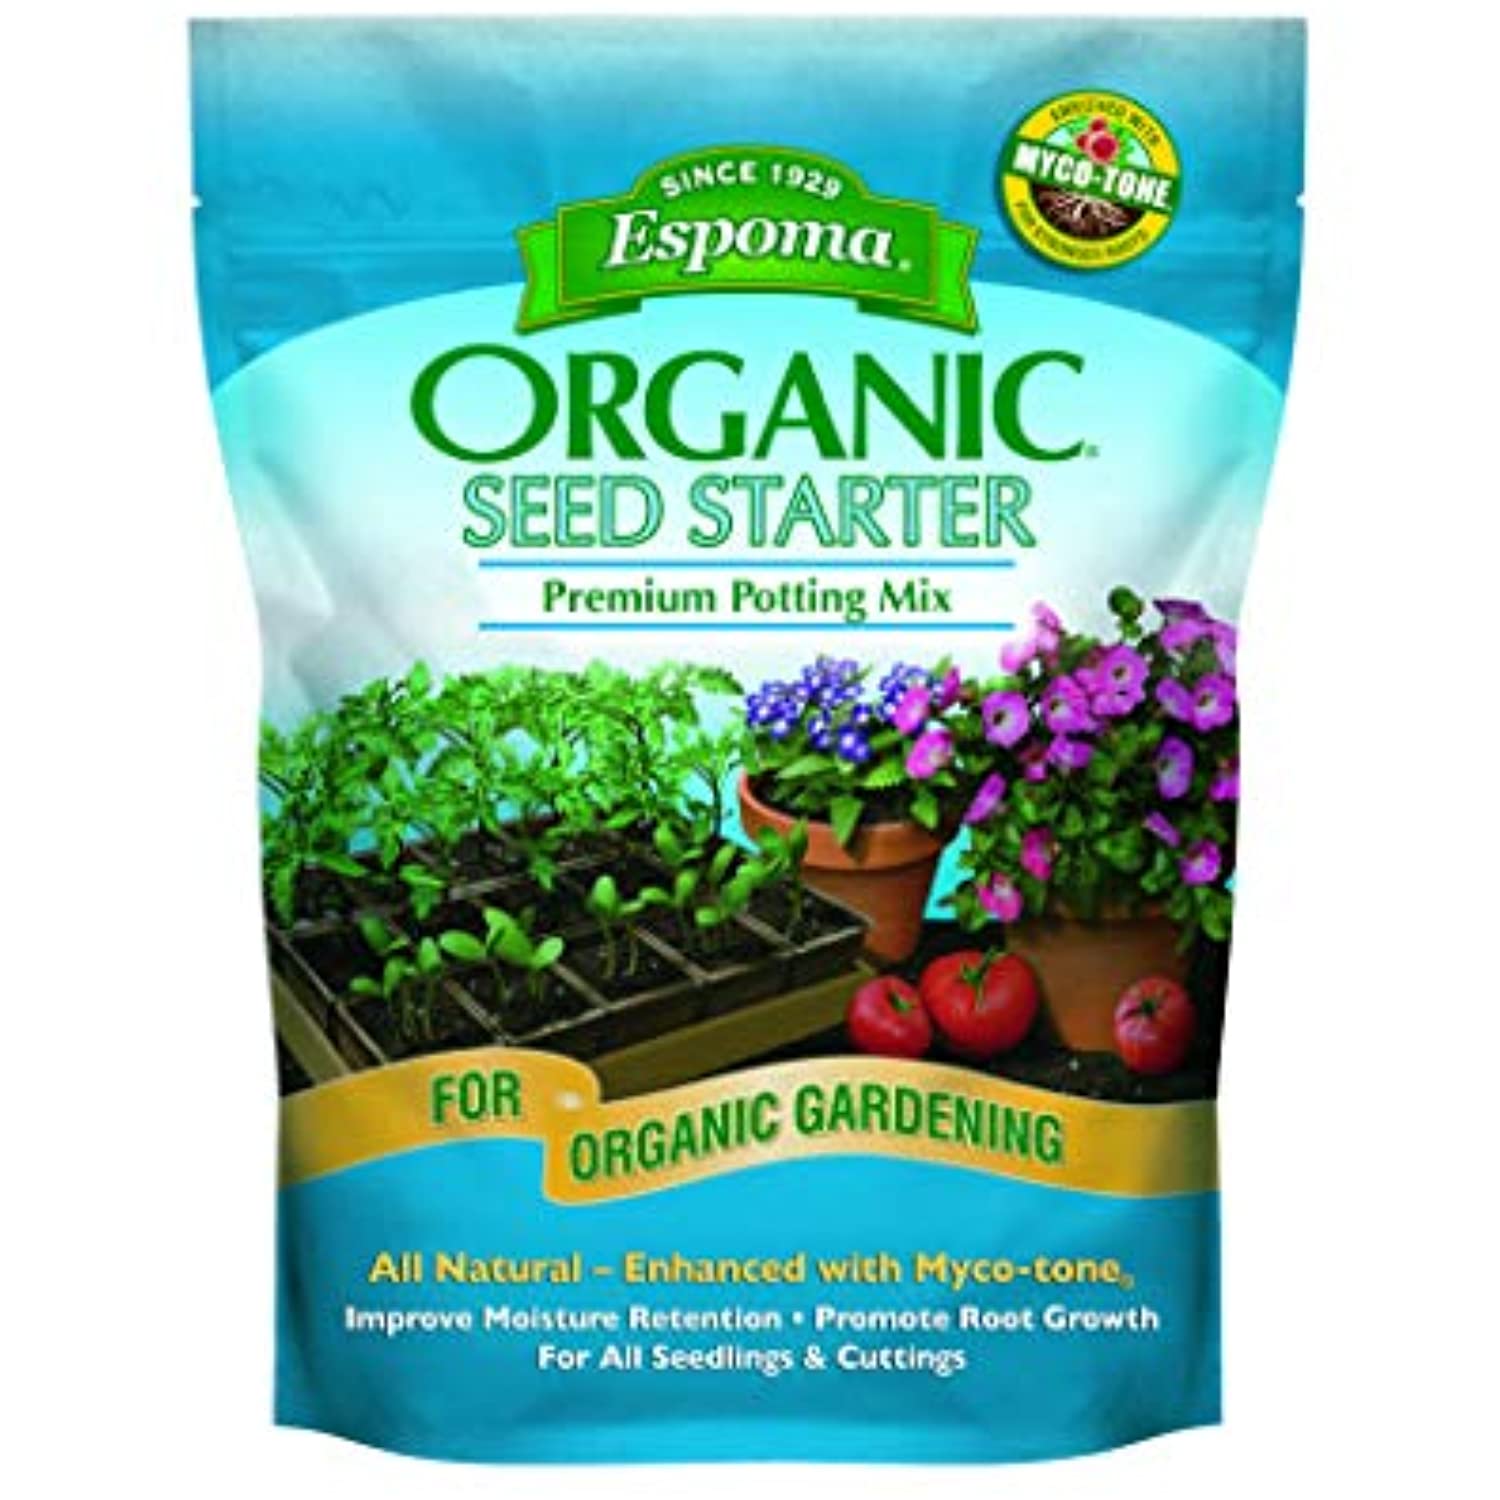 Espoma Seed Starter Potting Mix, Natural & Organic Premium Potting Mix for Seedlings and Cuttings, 8 qt, Pack of 2